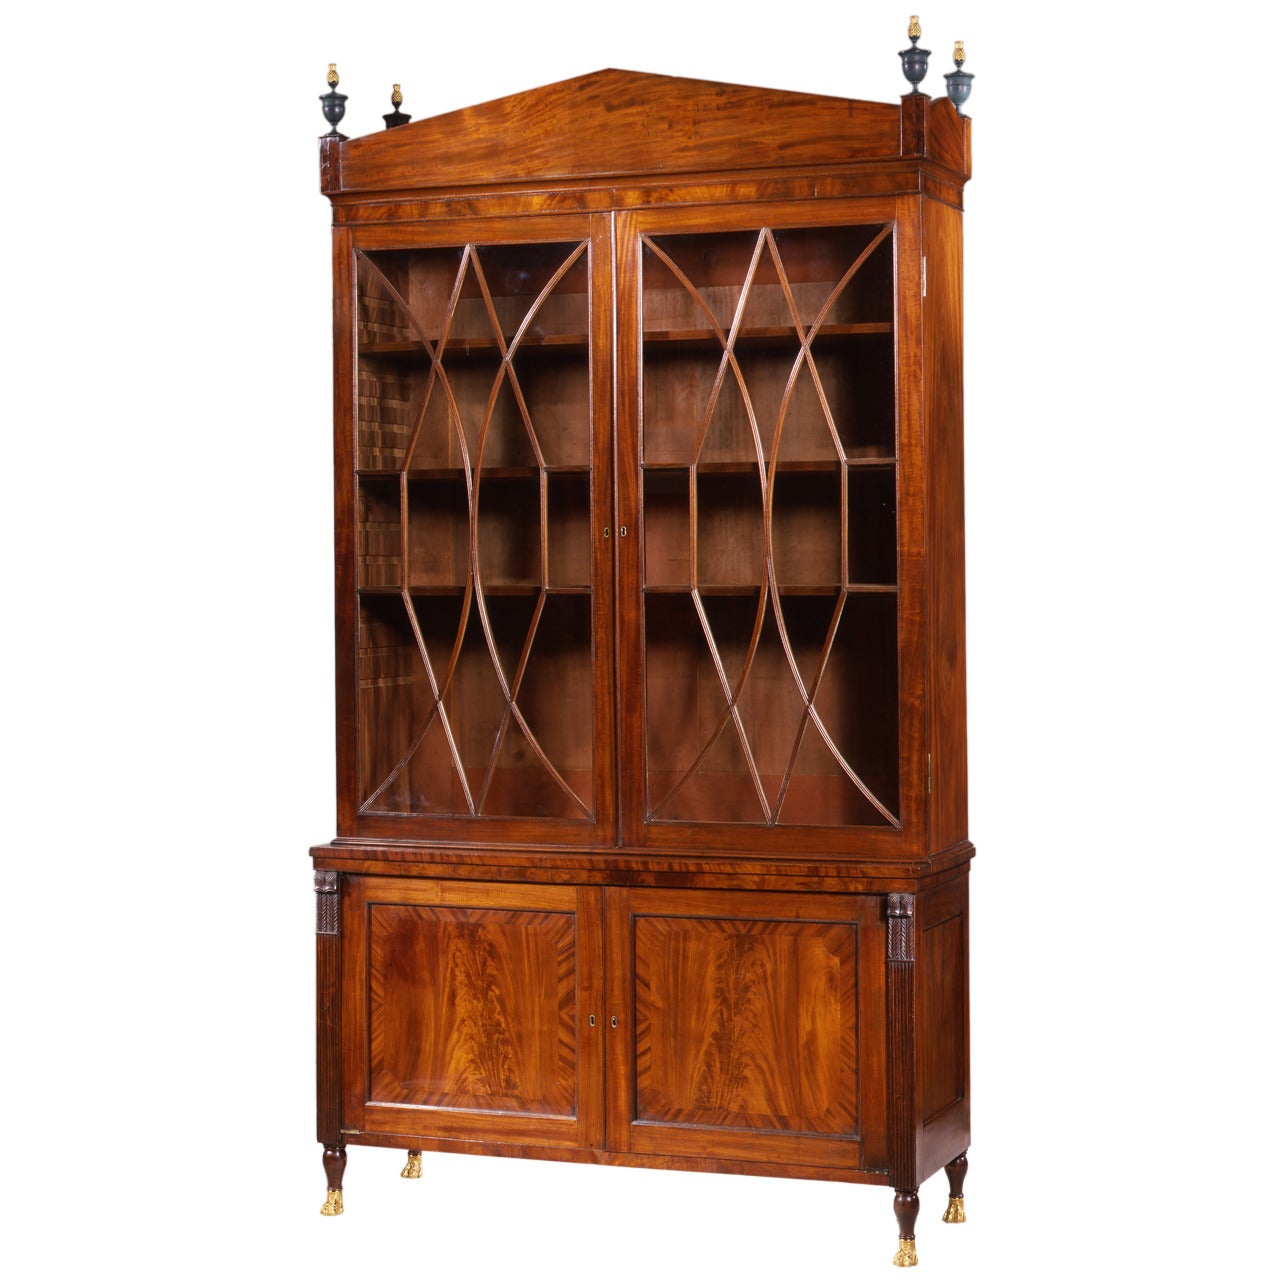 Federal Carved Mahogany Bookcase with Brass Paw Feet, circa 1805-1810 For Sale